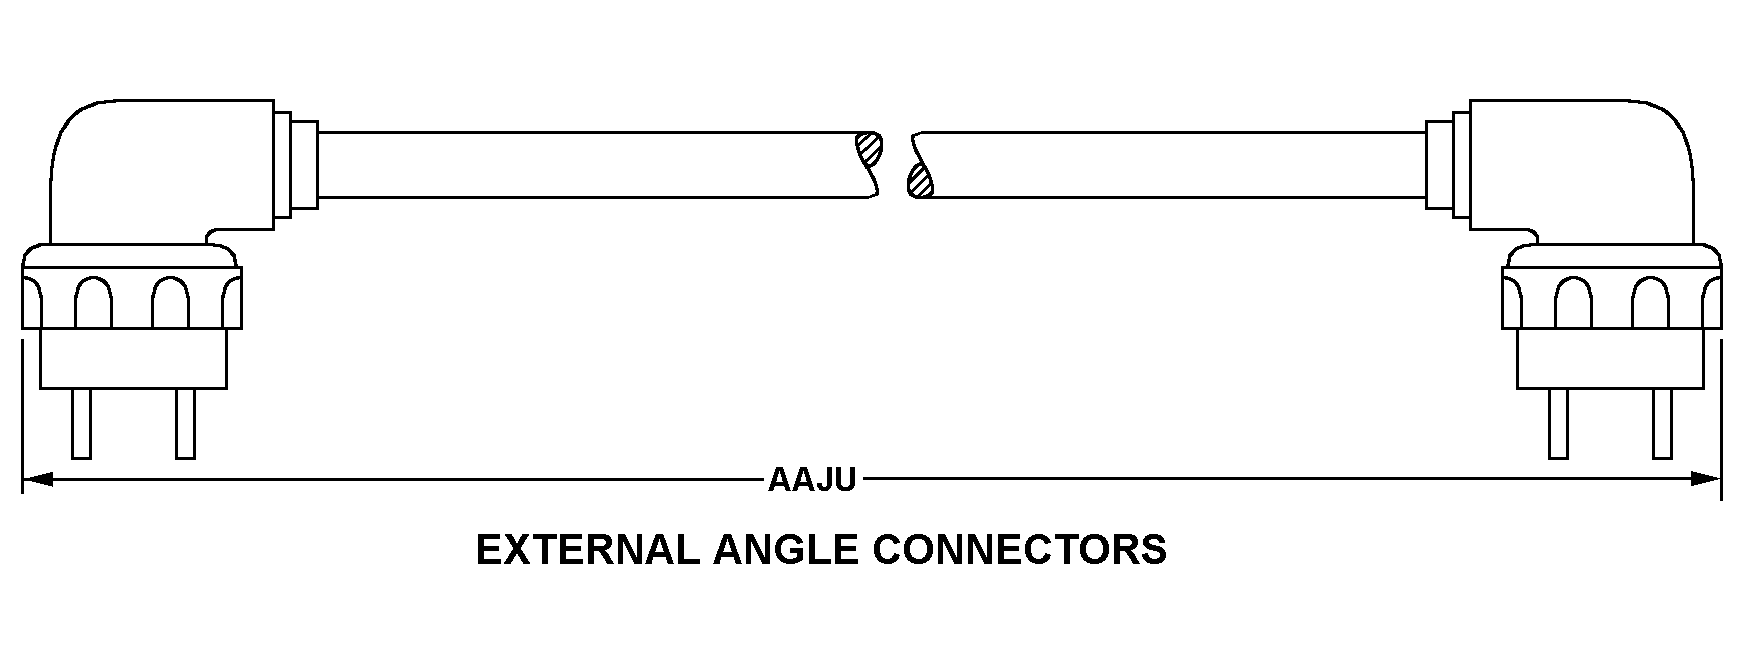 EXTERNAL ANGLE CONNECTORS style nsn 5995-01-333-6564